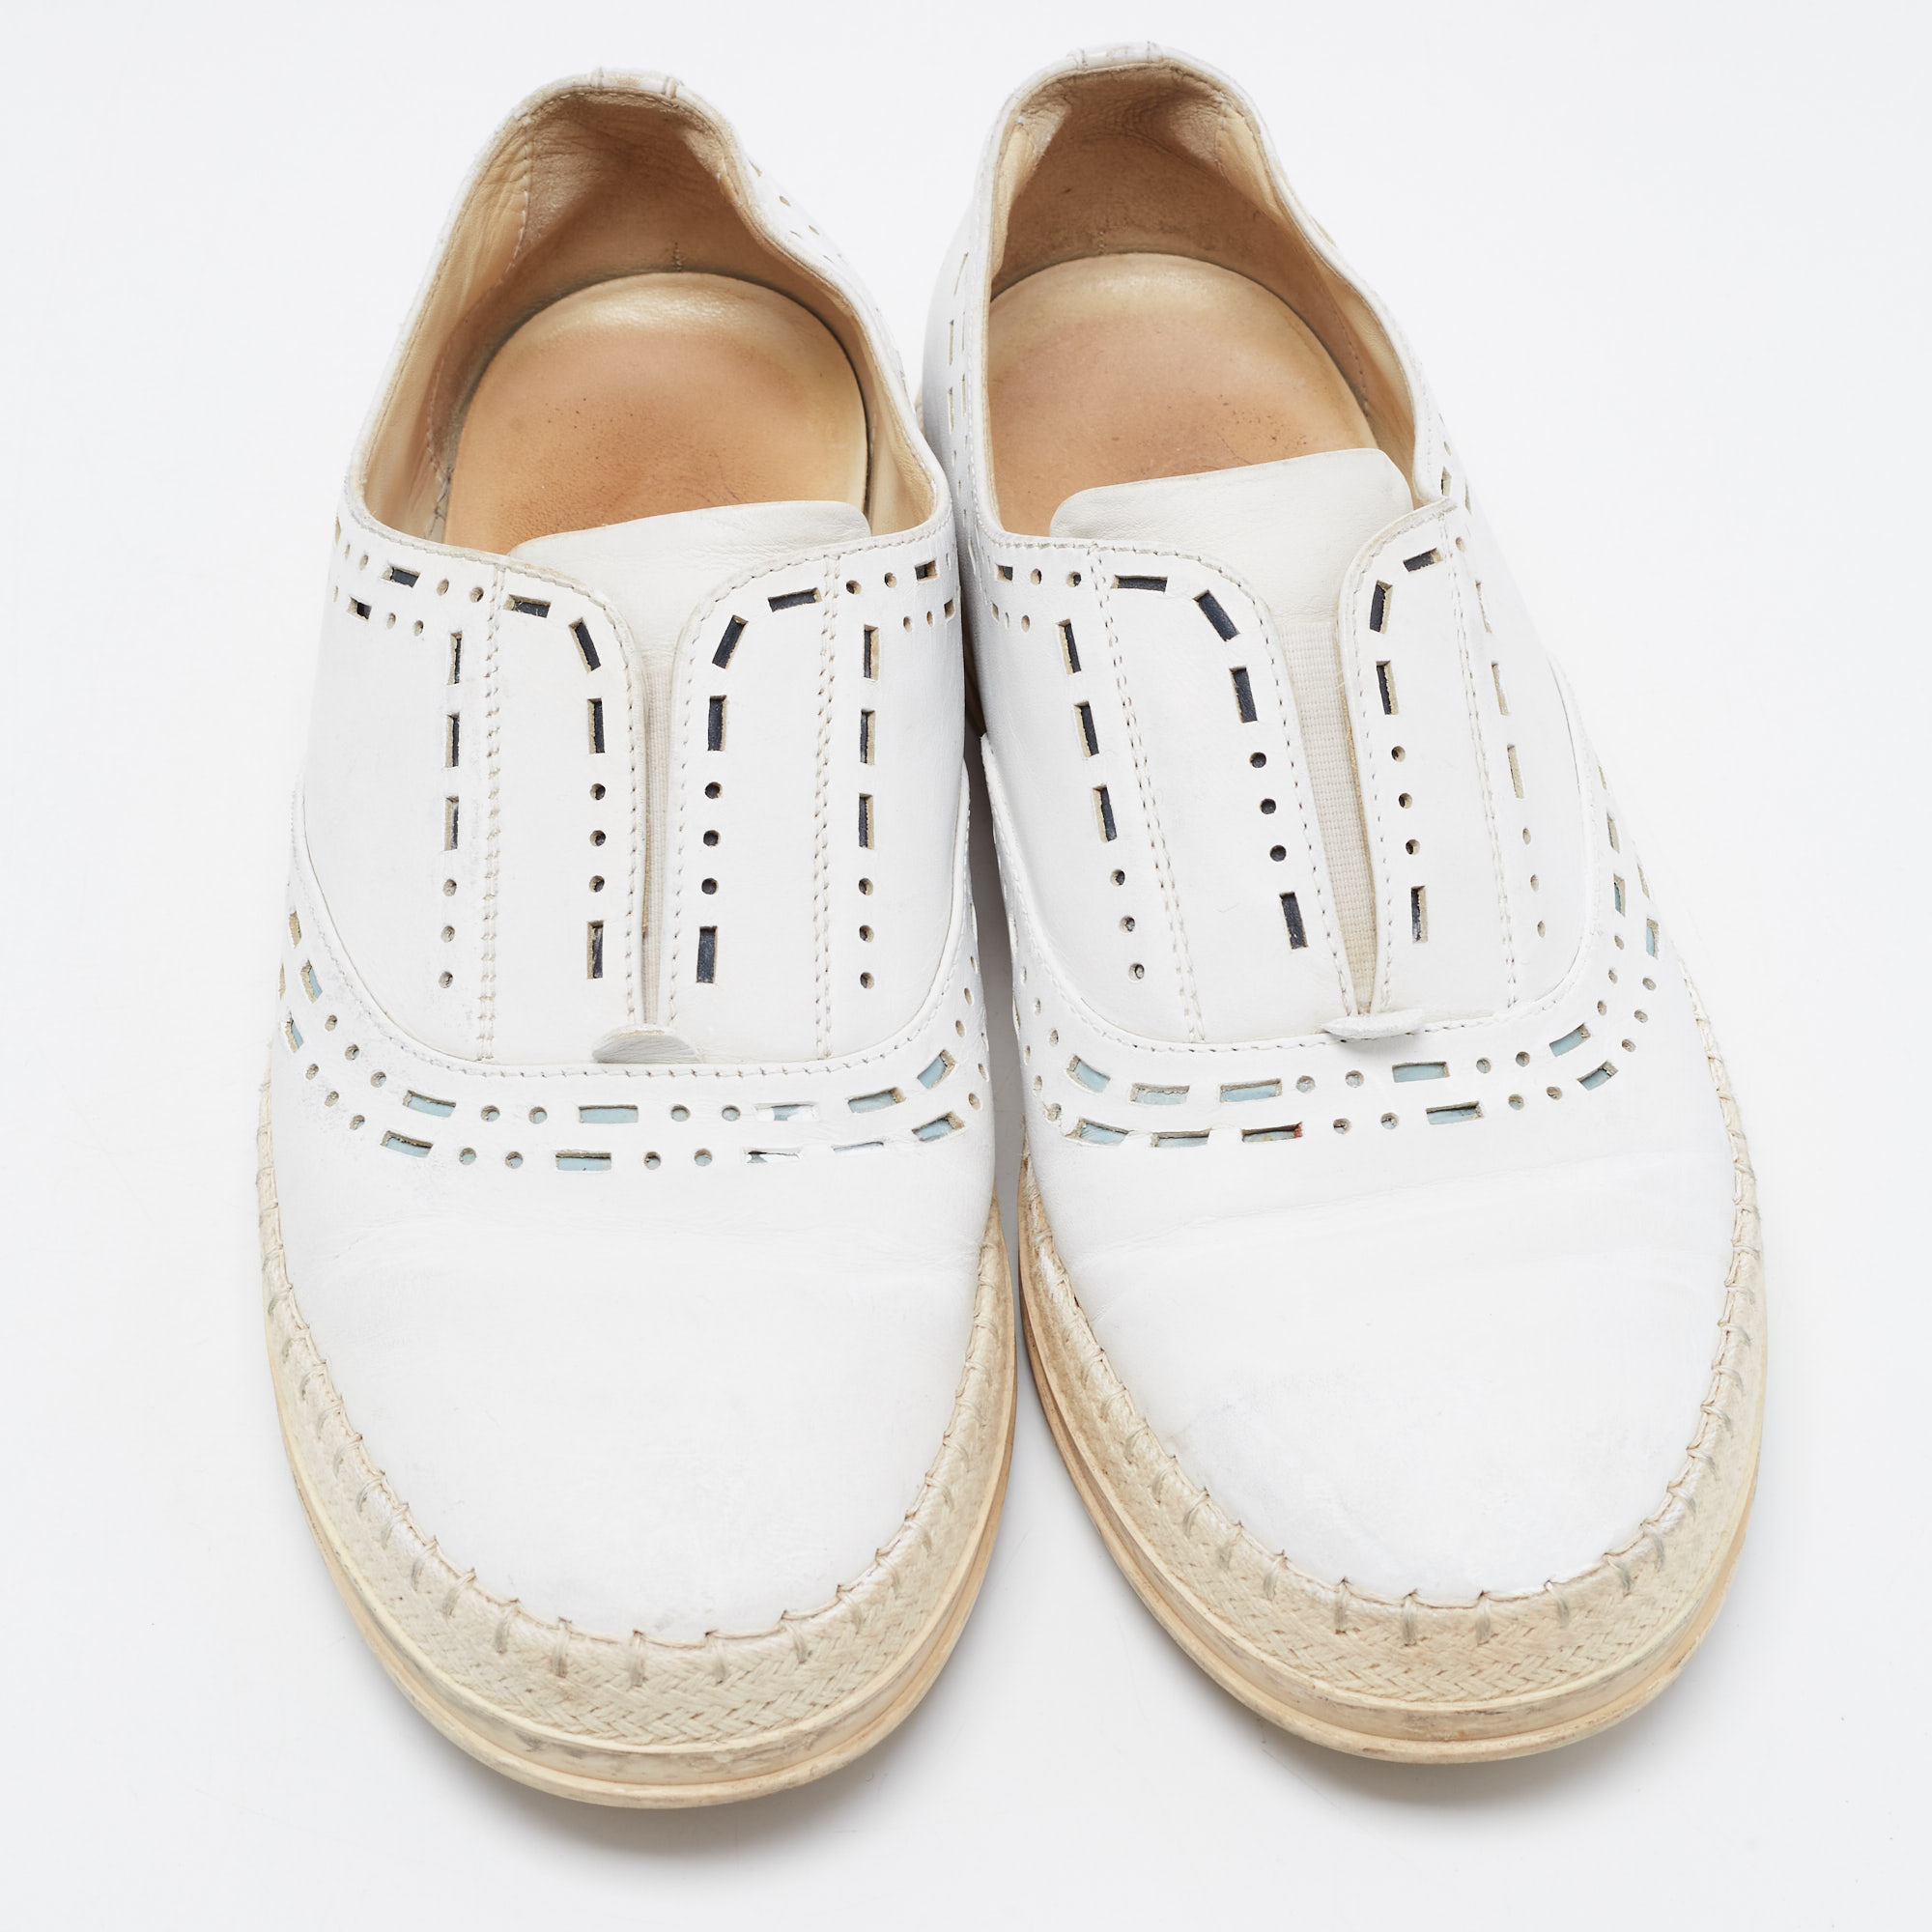 Tod's White Leather Slip On Loafers Size 37.5